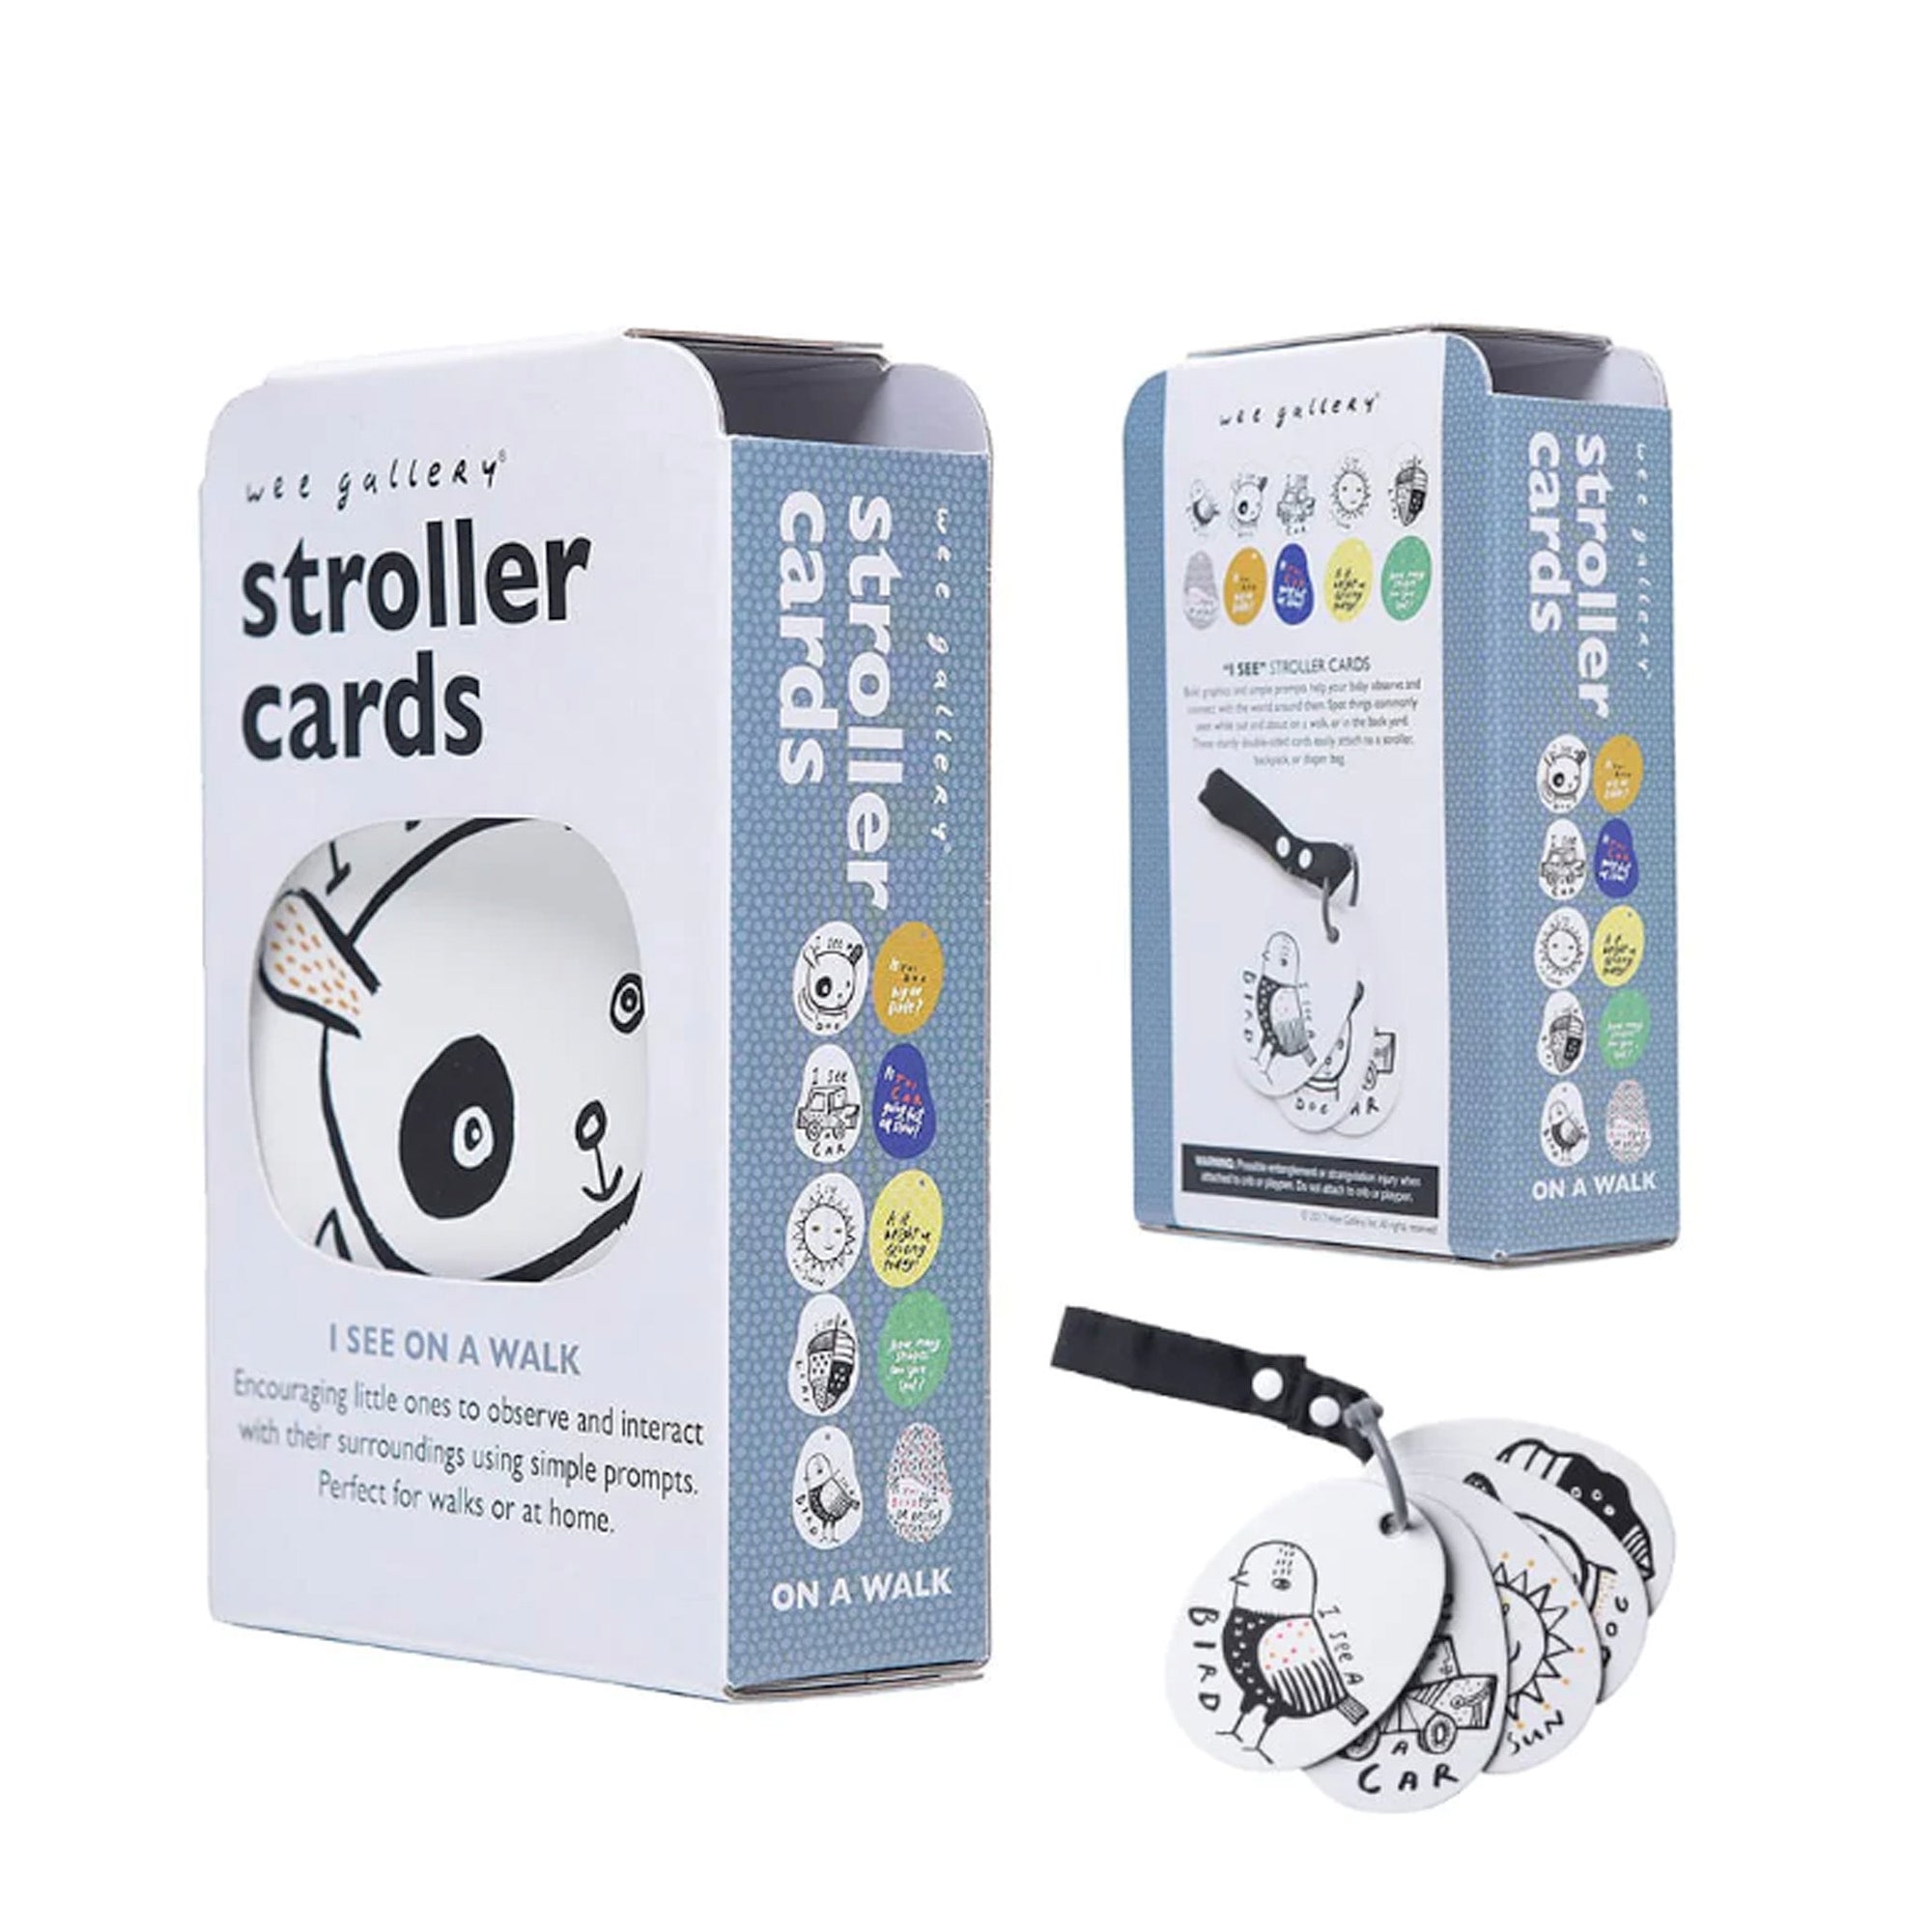 An image of Stroller Cards - Wee Gallery Buggy Cards | Small Smart UK